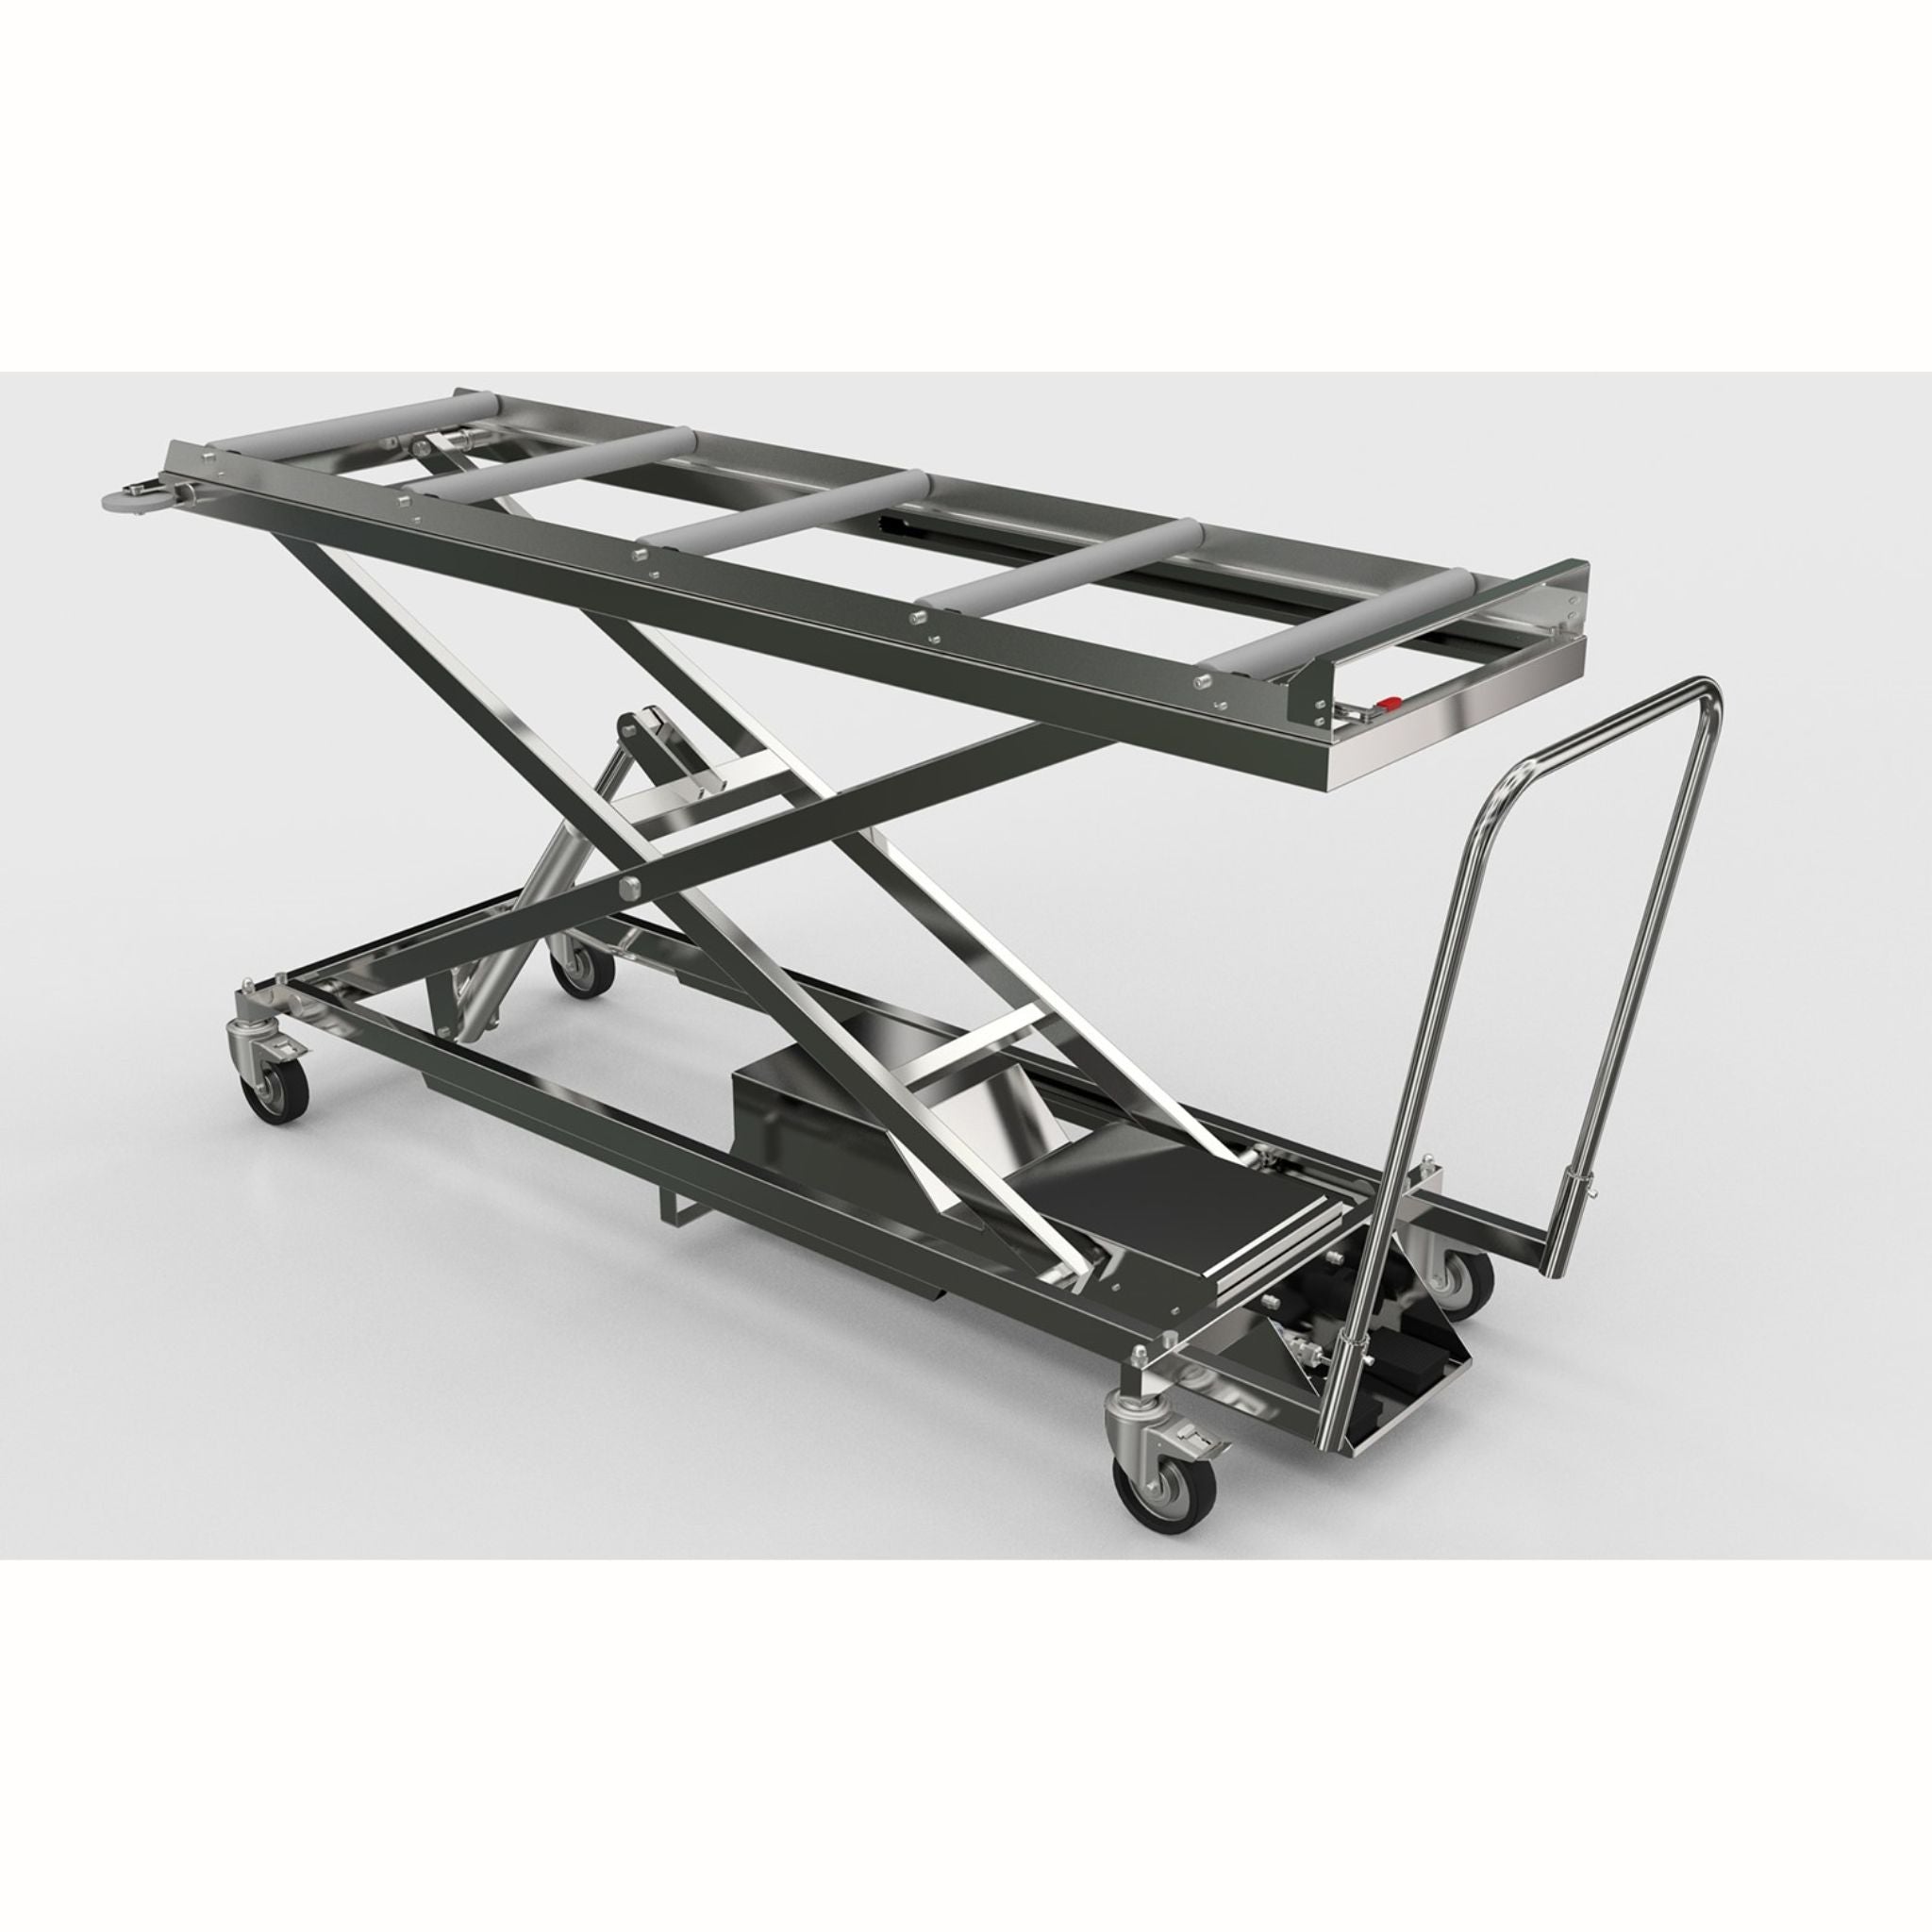 Ball lifting and transport trolley with 12V hydraulic unit up to 350 kg